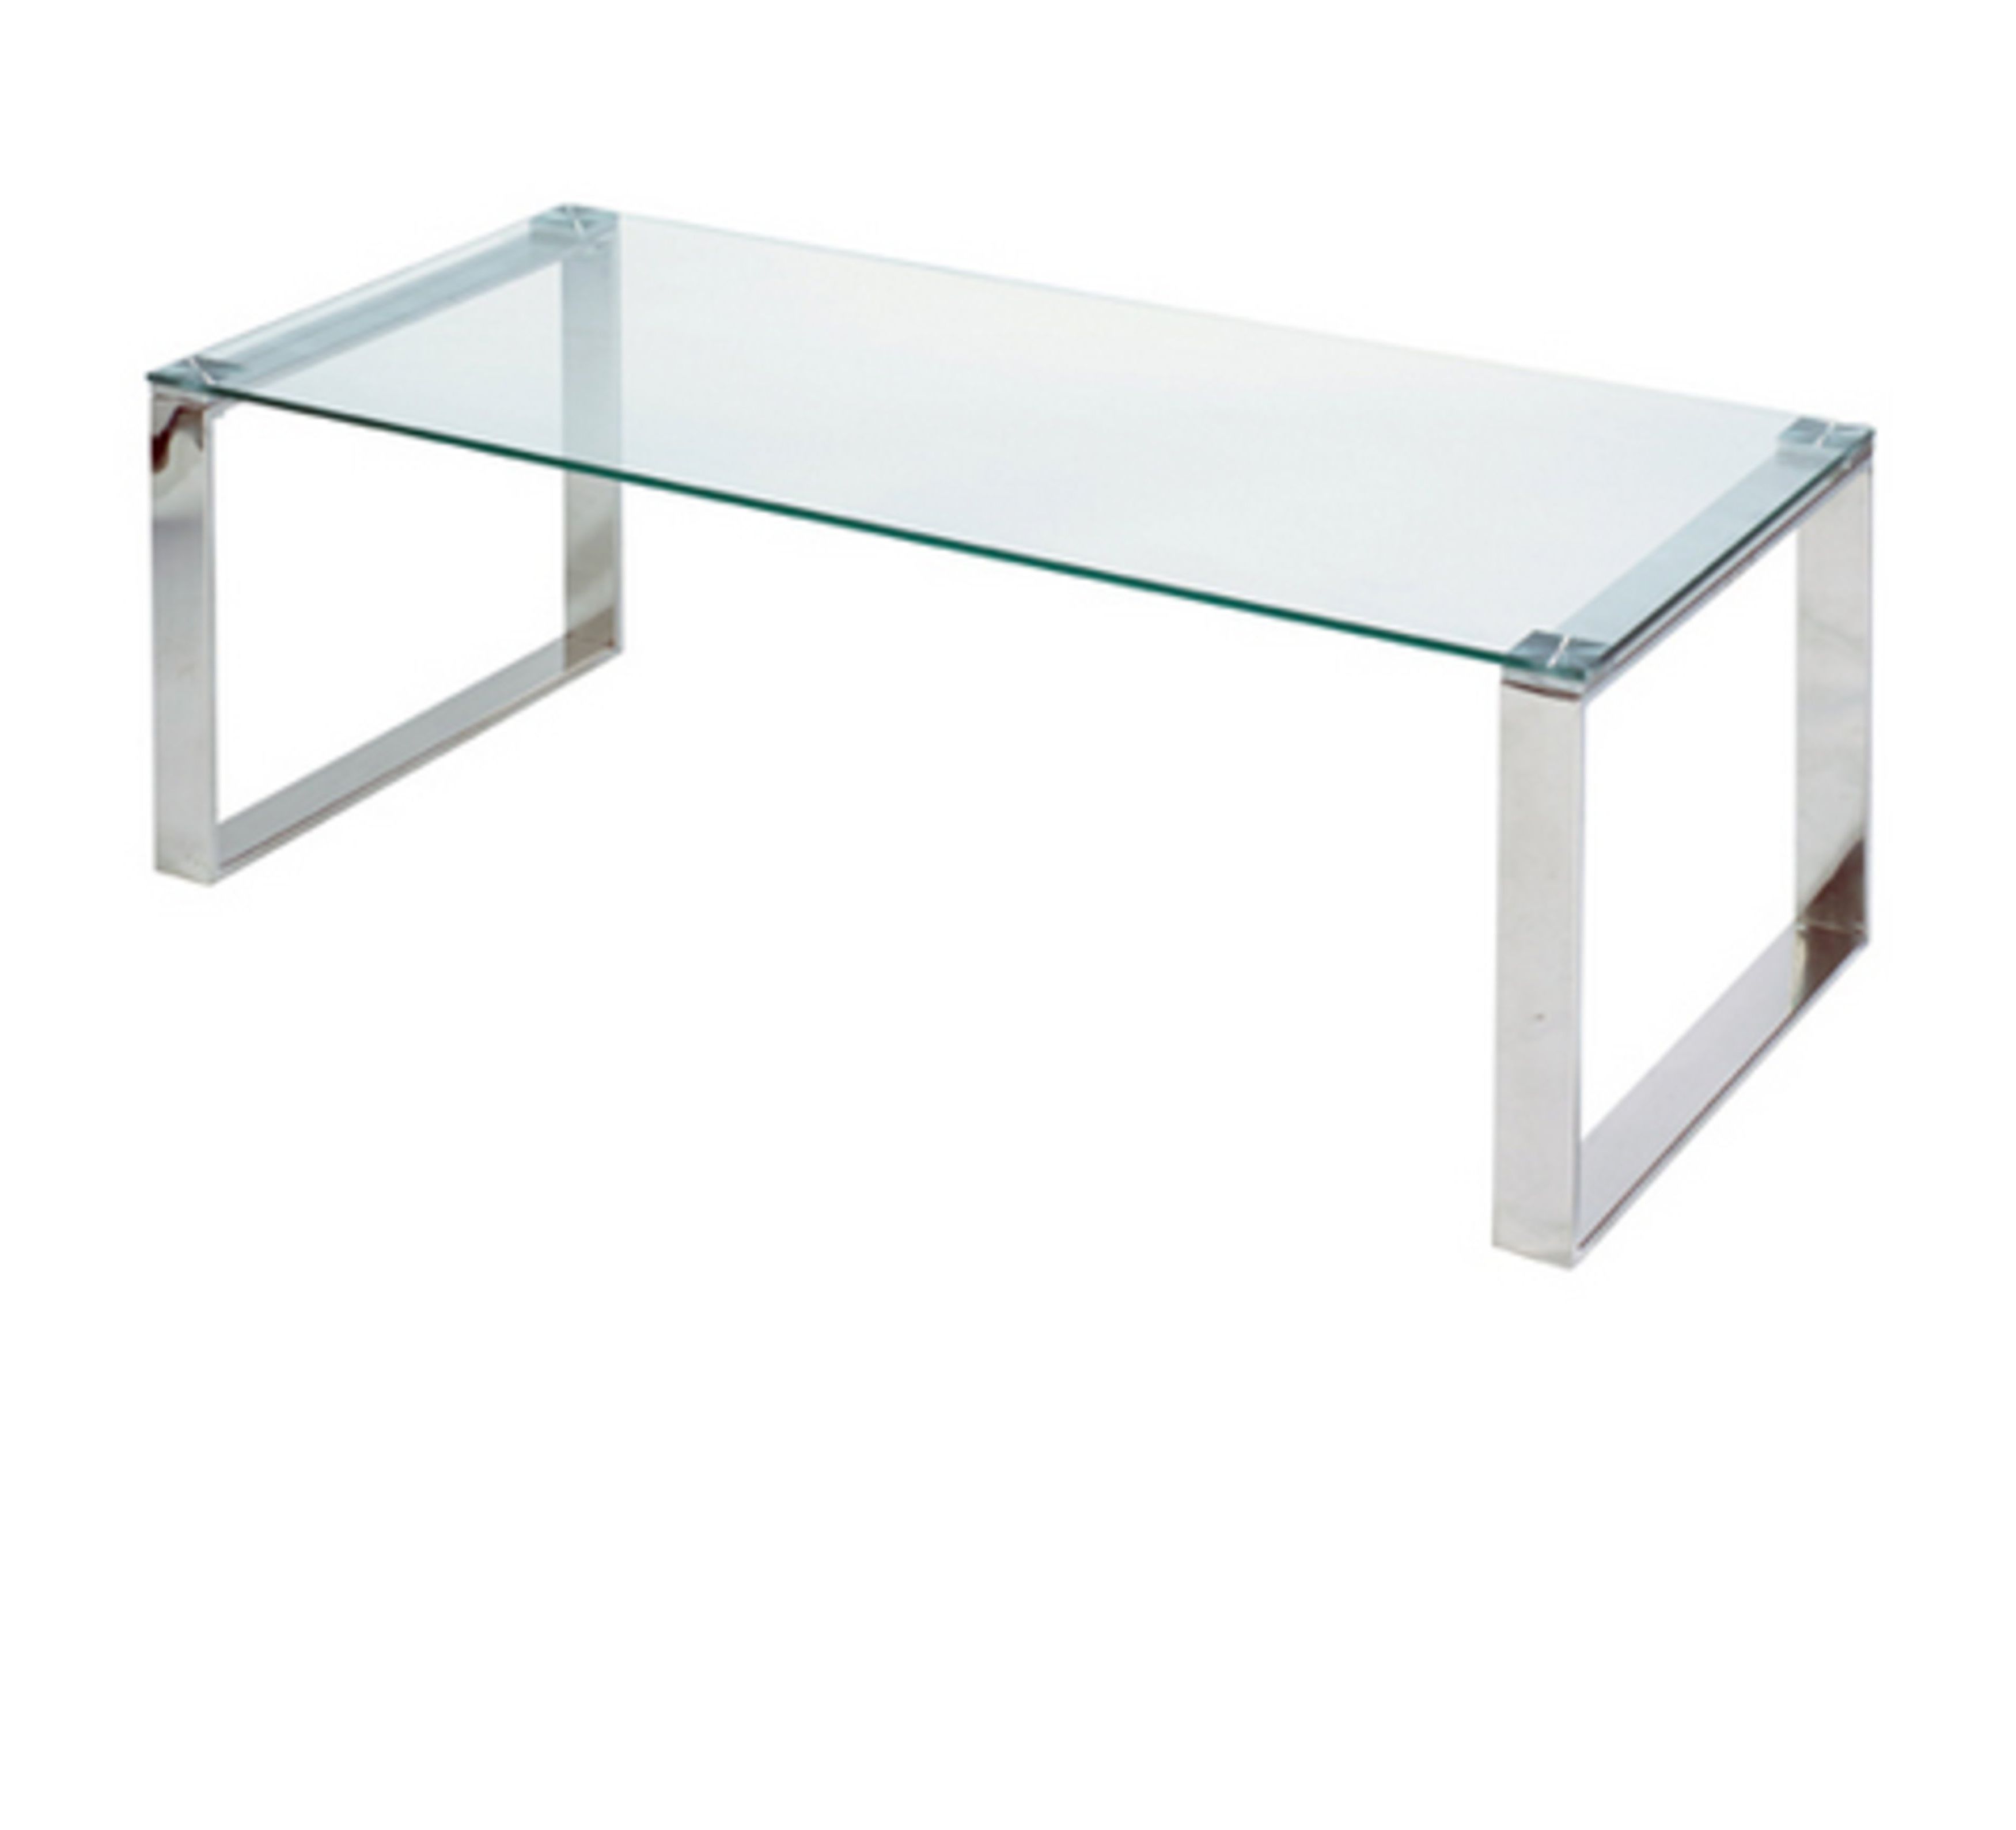 Cortesi Home Remi Contemporary Glass Coffee Table With Regarding Best And Newest Cortesi Home Remi Contemporary Chrome Glass Coffee Tables (View 1 of 20)